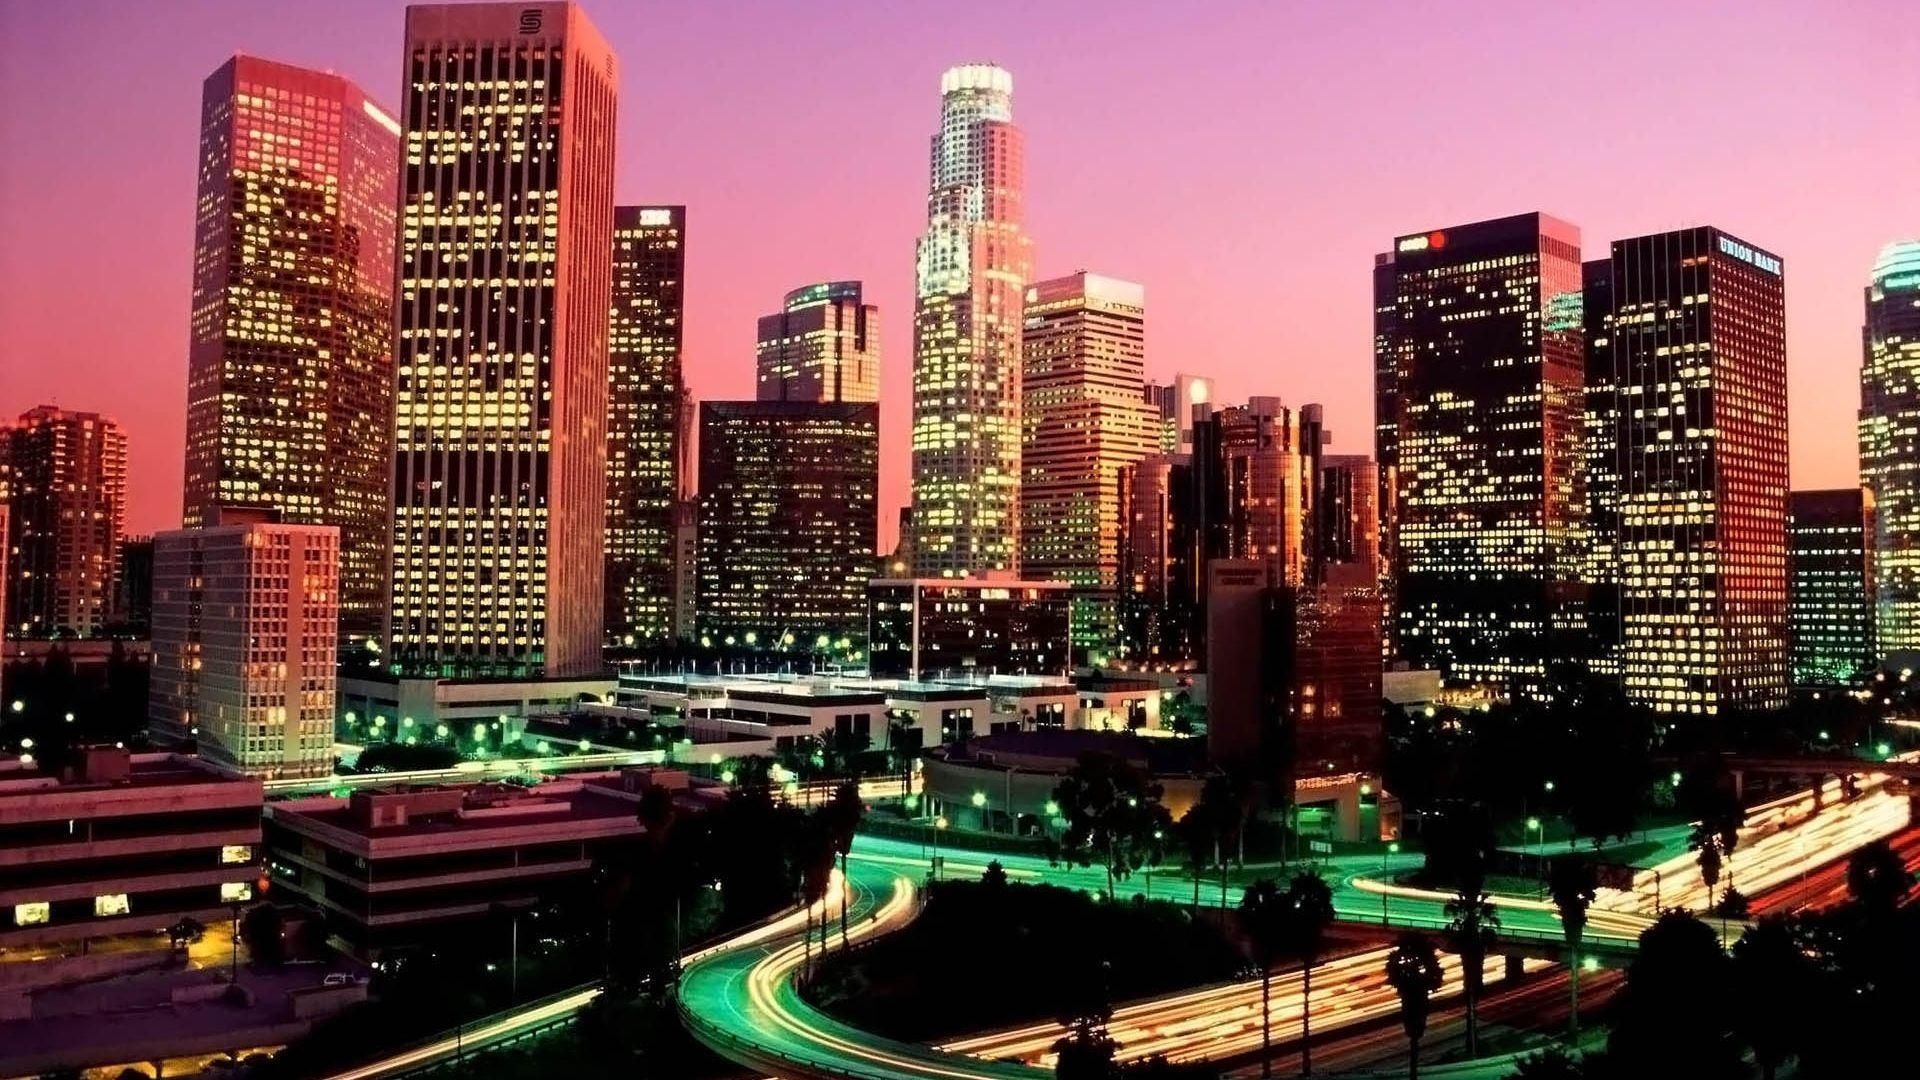 Los Angeles: One of the most complex megacities of the world, CA. 1920x1080 Full HD Wallpaper.